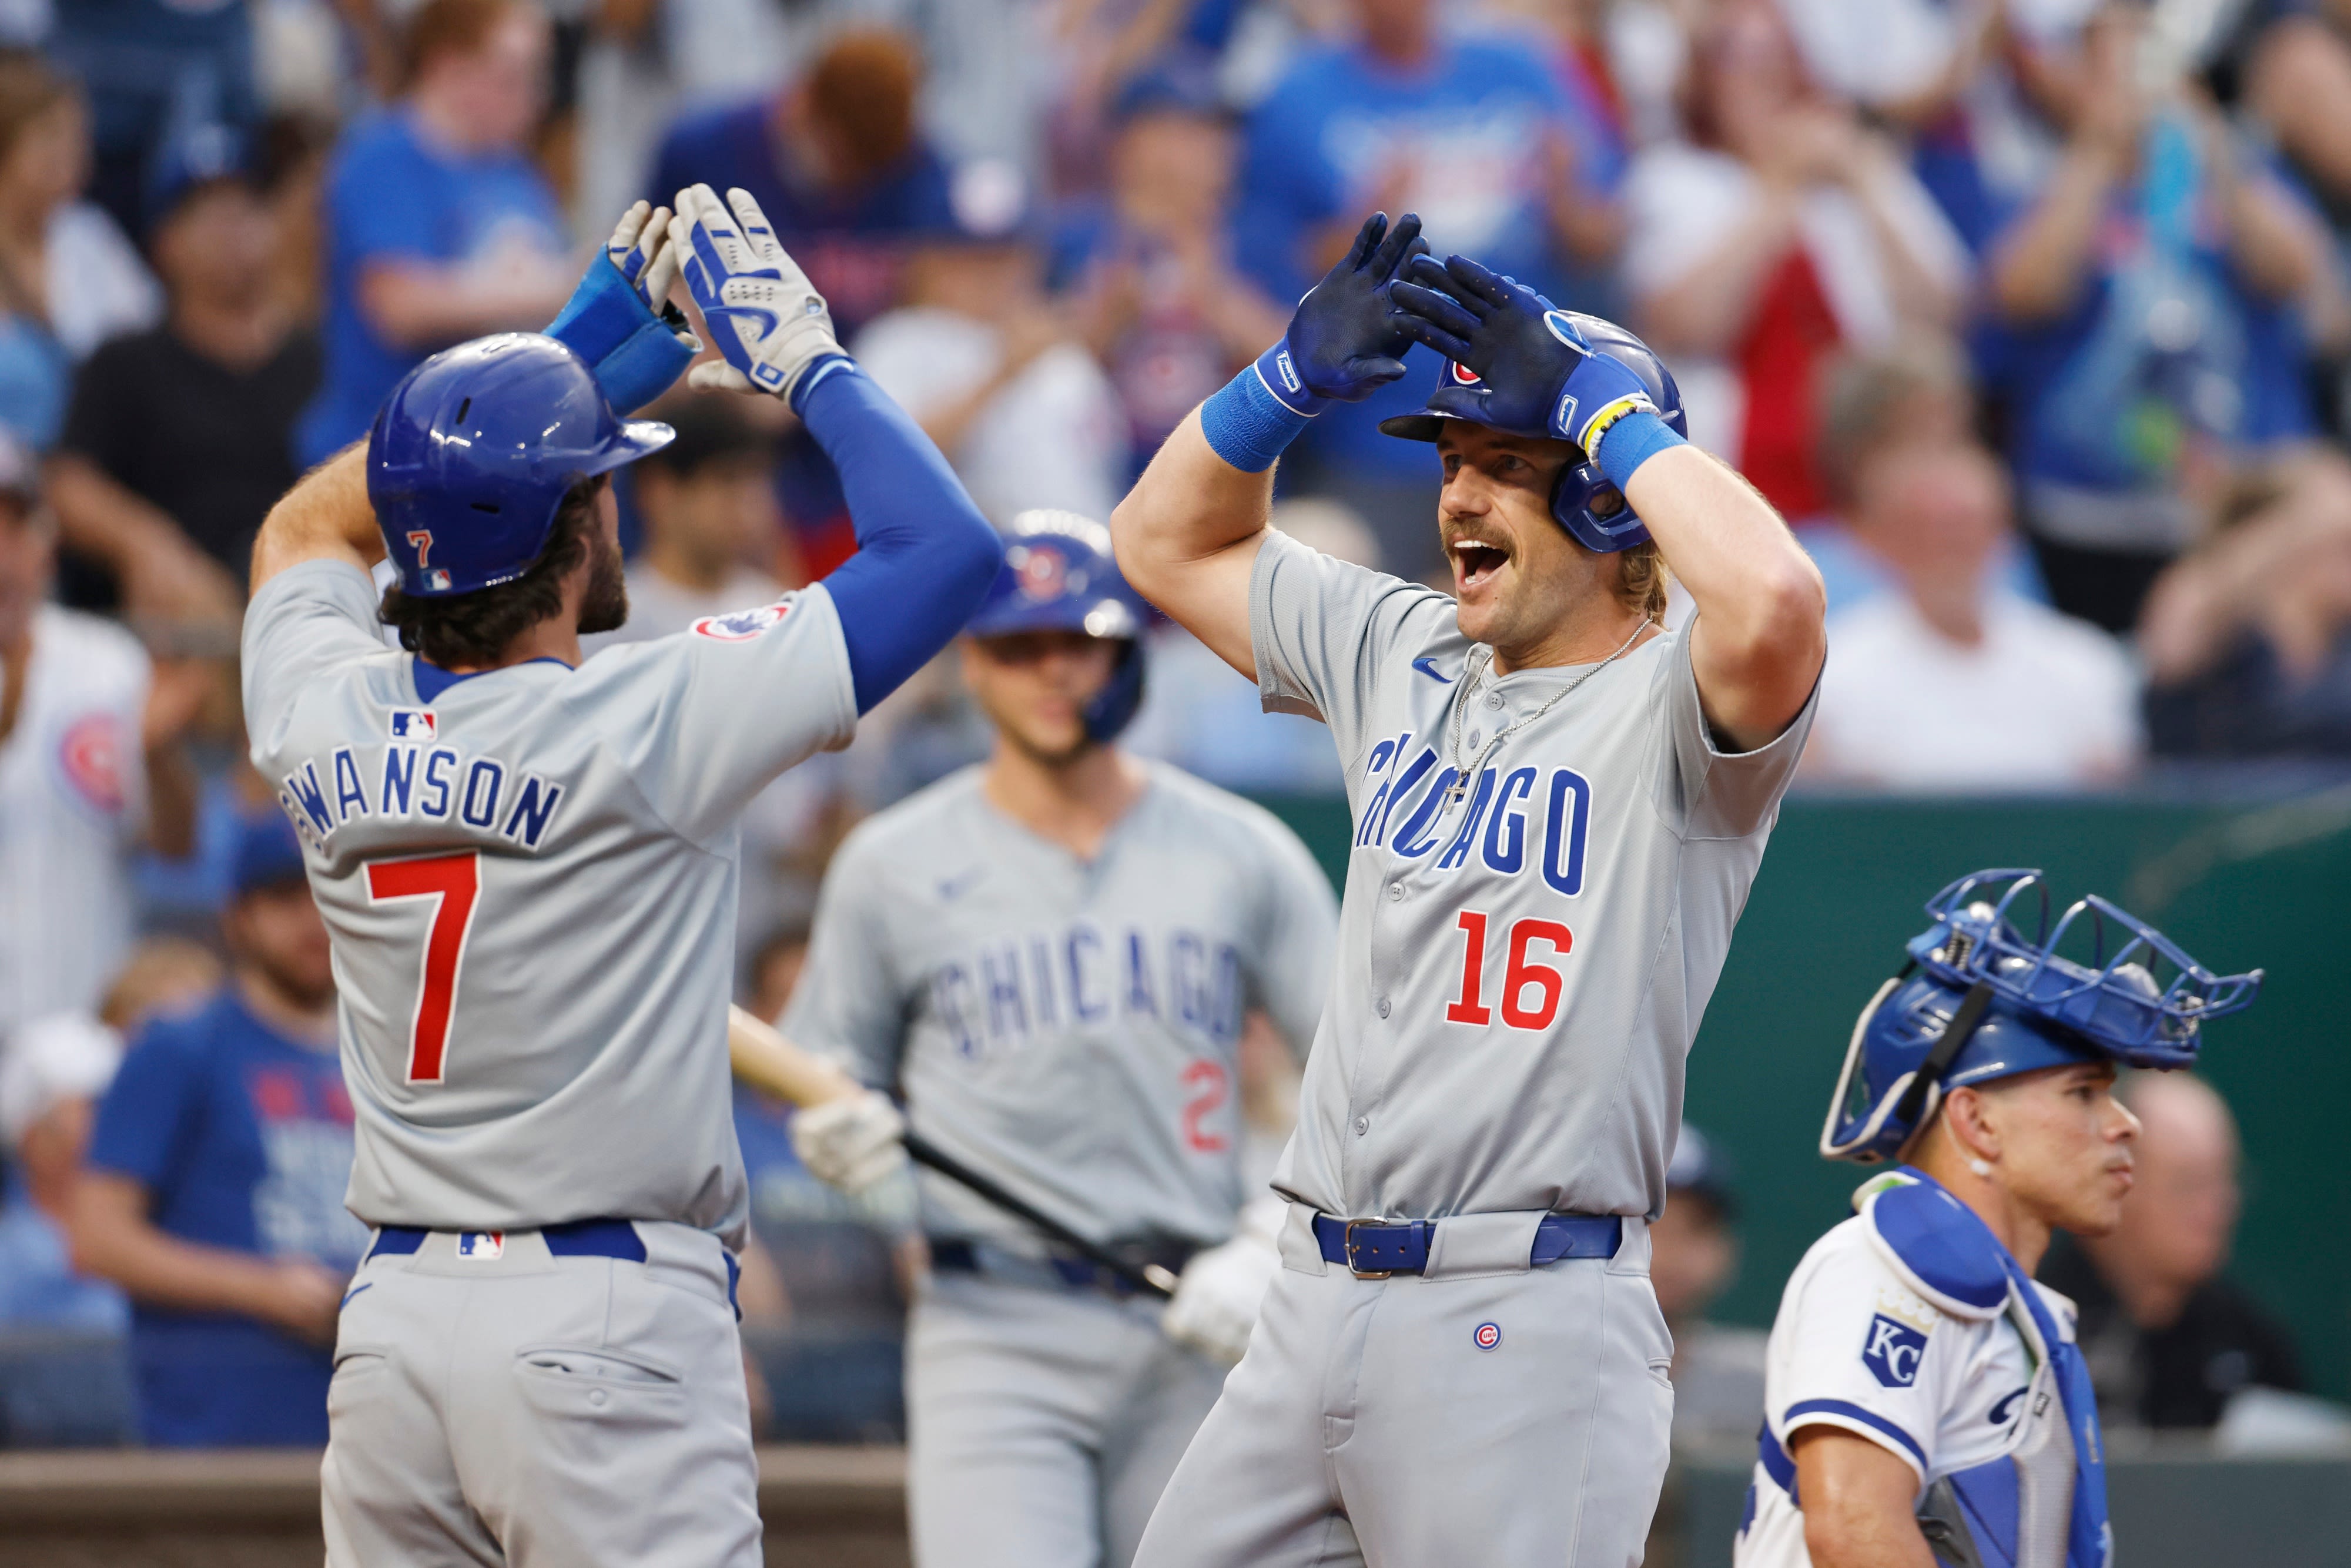 Patrick Wisdom hits grand slam as a pinch hitter in the 7th, the Cubs beat the Royals 9-4